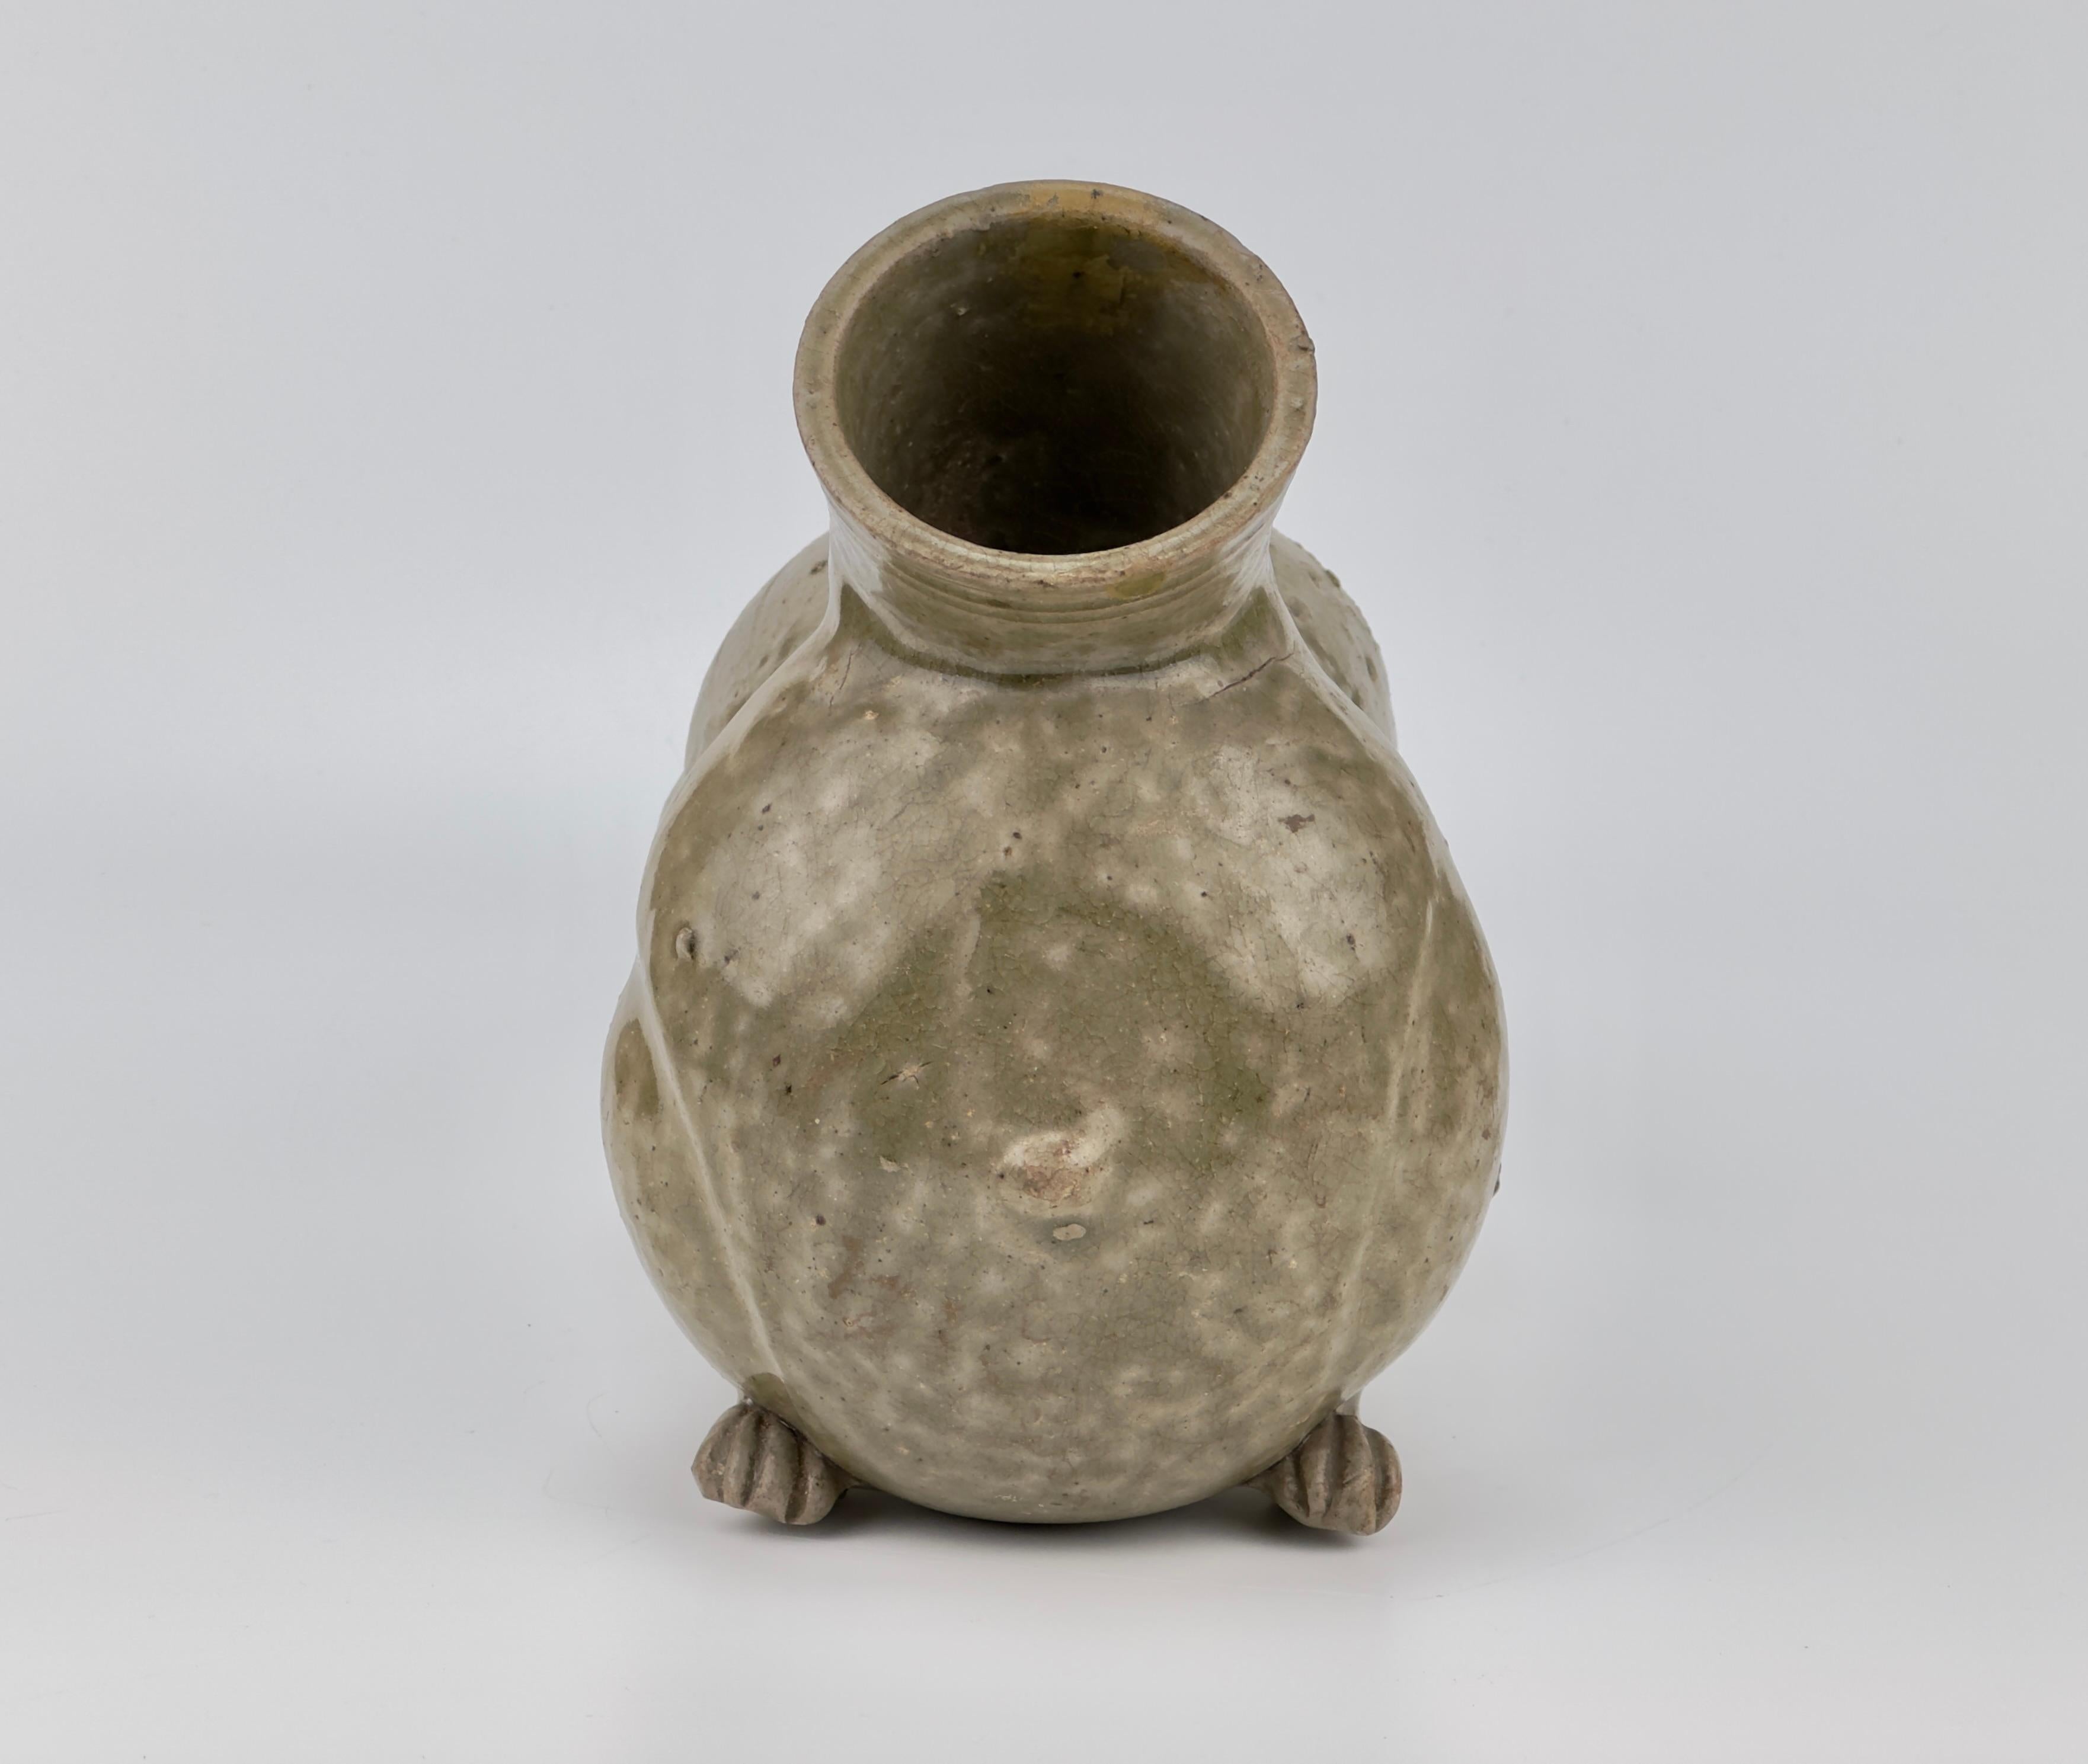 18th Century and Earlier Rare Yue Celadon-Glazed Figural Vessel, Western Jin dynasty (265-420) For Sale